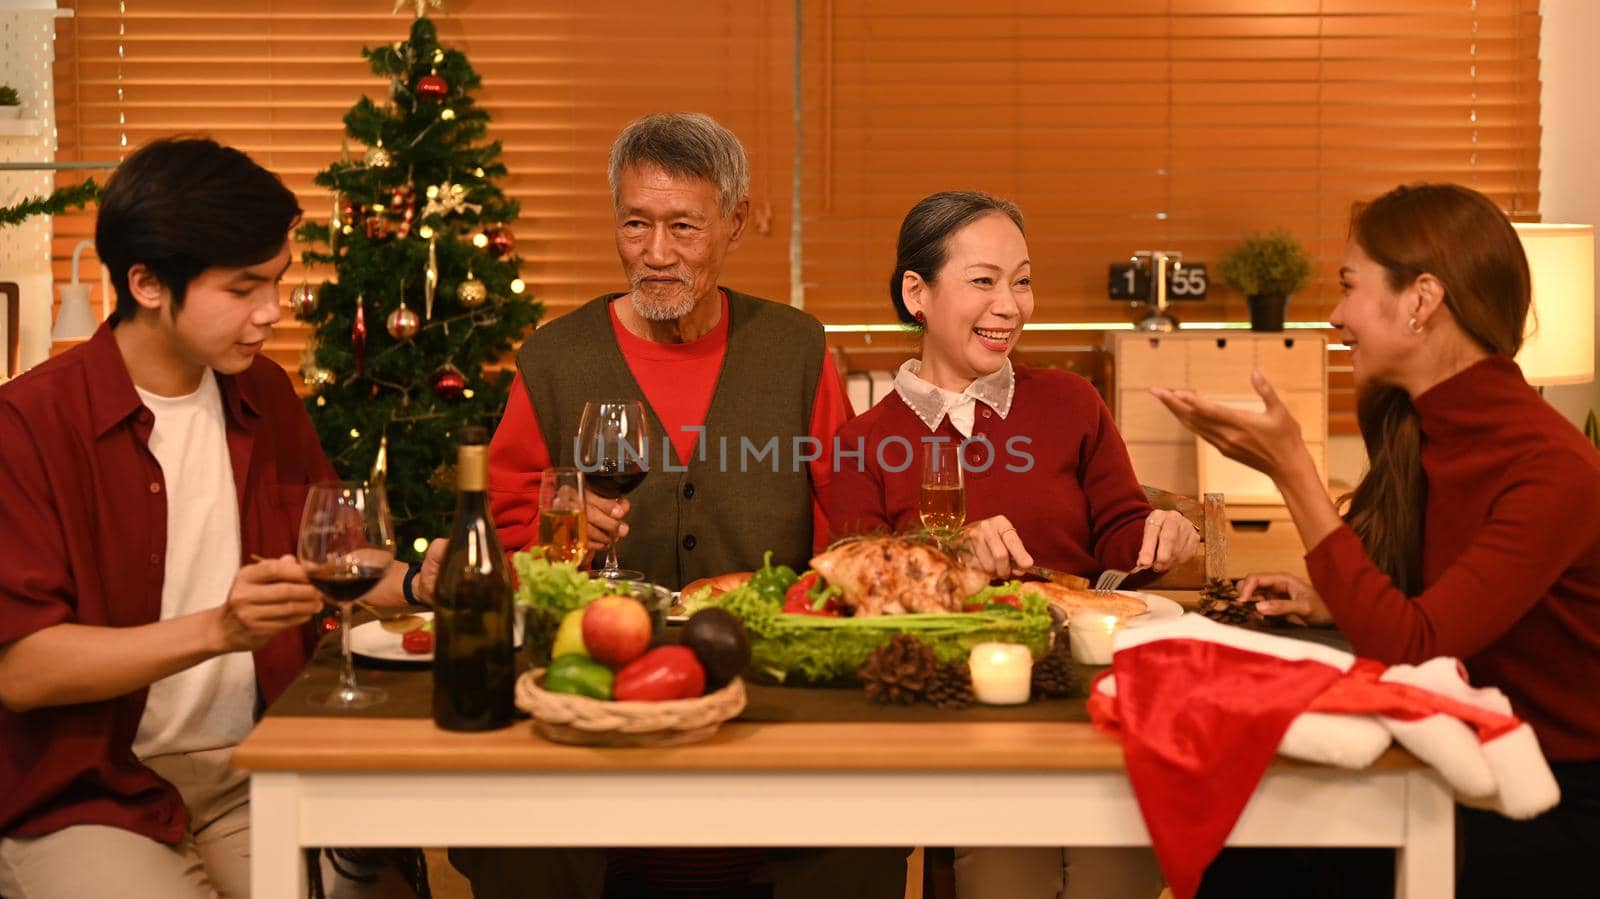 Group of people enjoying Thanksgiving meal in comfortable home. Celebration, holidays and Christmas concept.